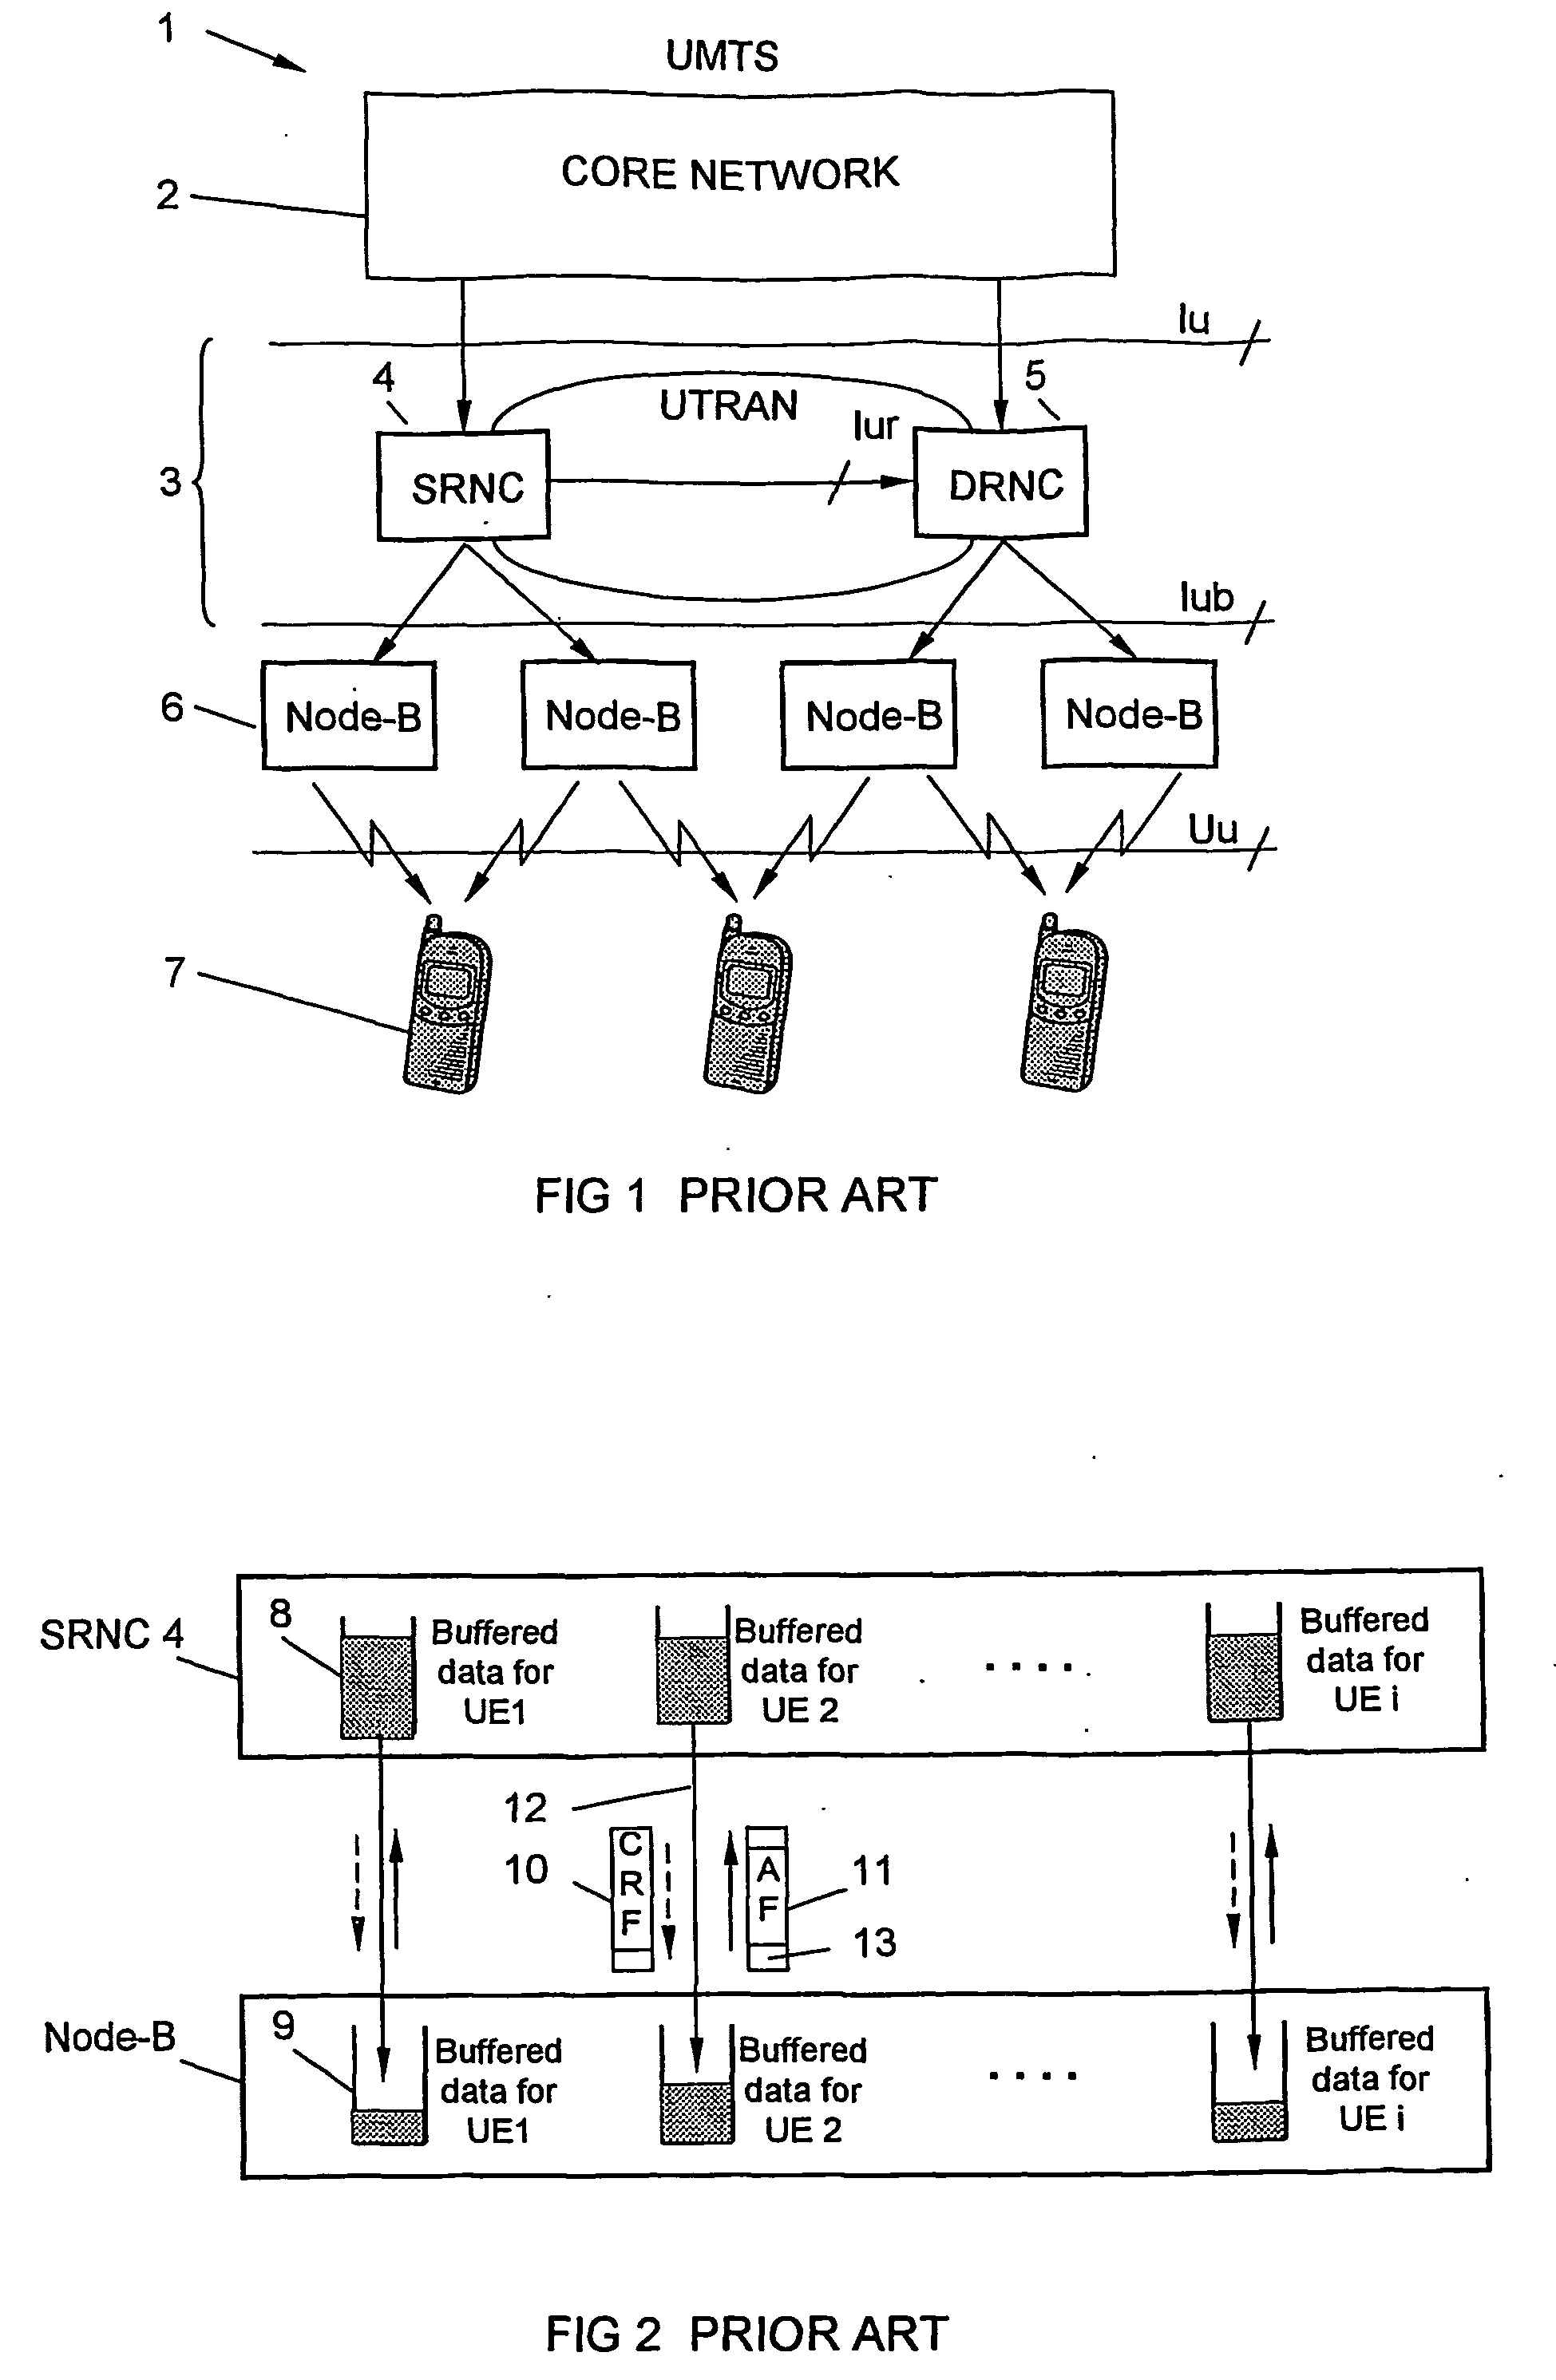 Coordinated data flow control and buffer sharing in umts